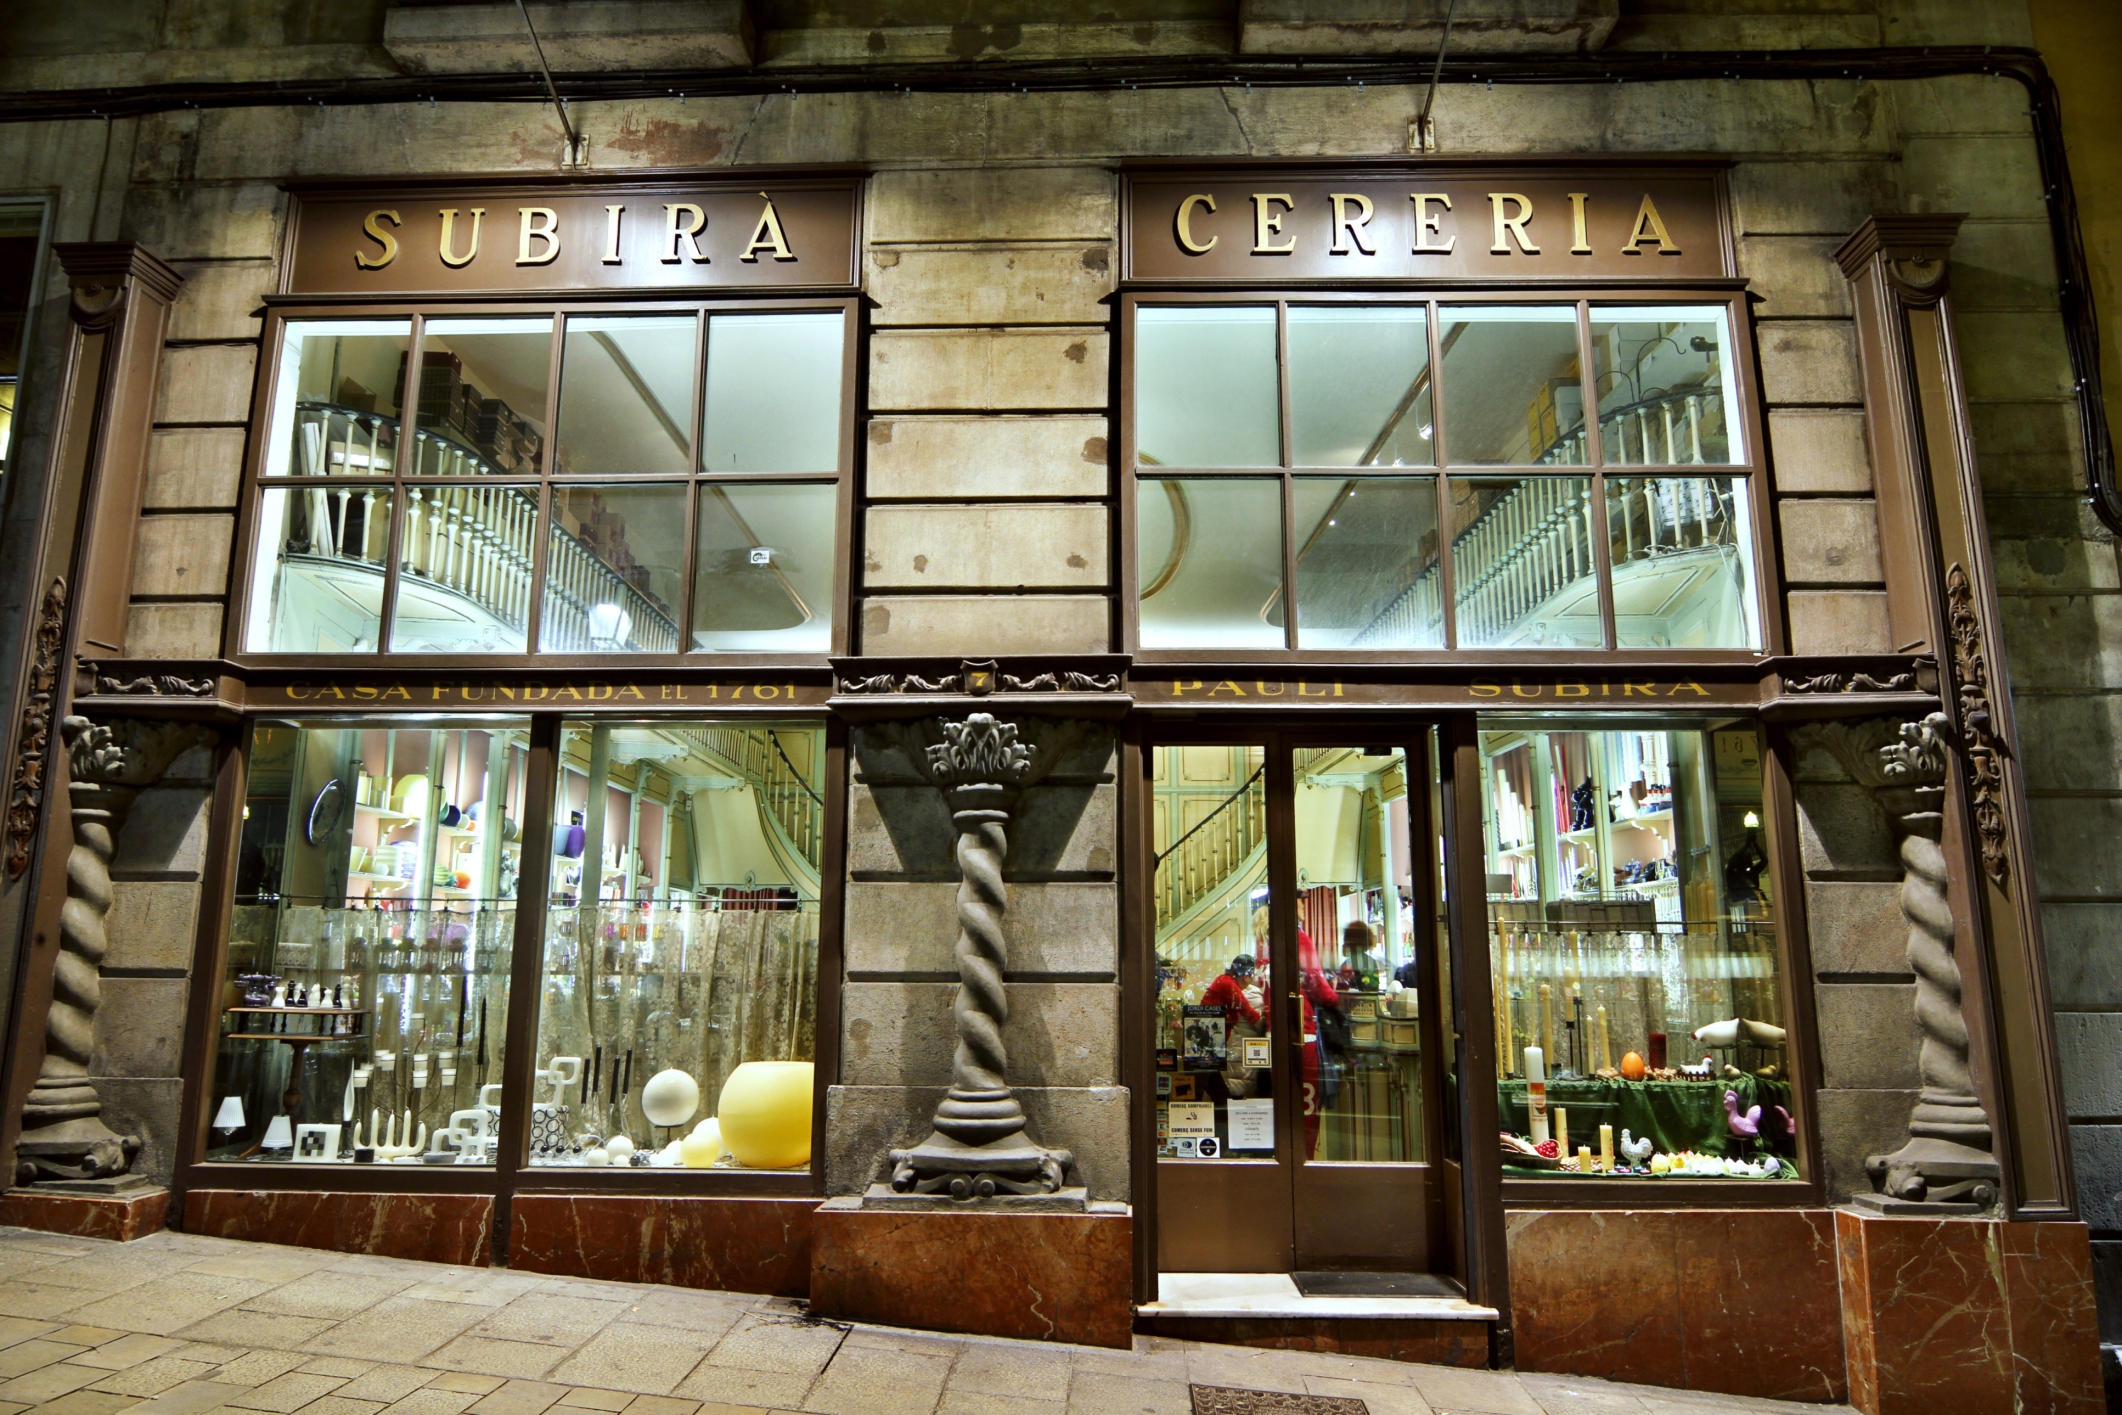 Cereria Subira is Barcelona's only remaining chandlery shop. Image by Jordi Sans